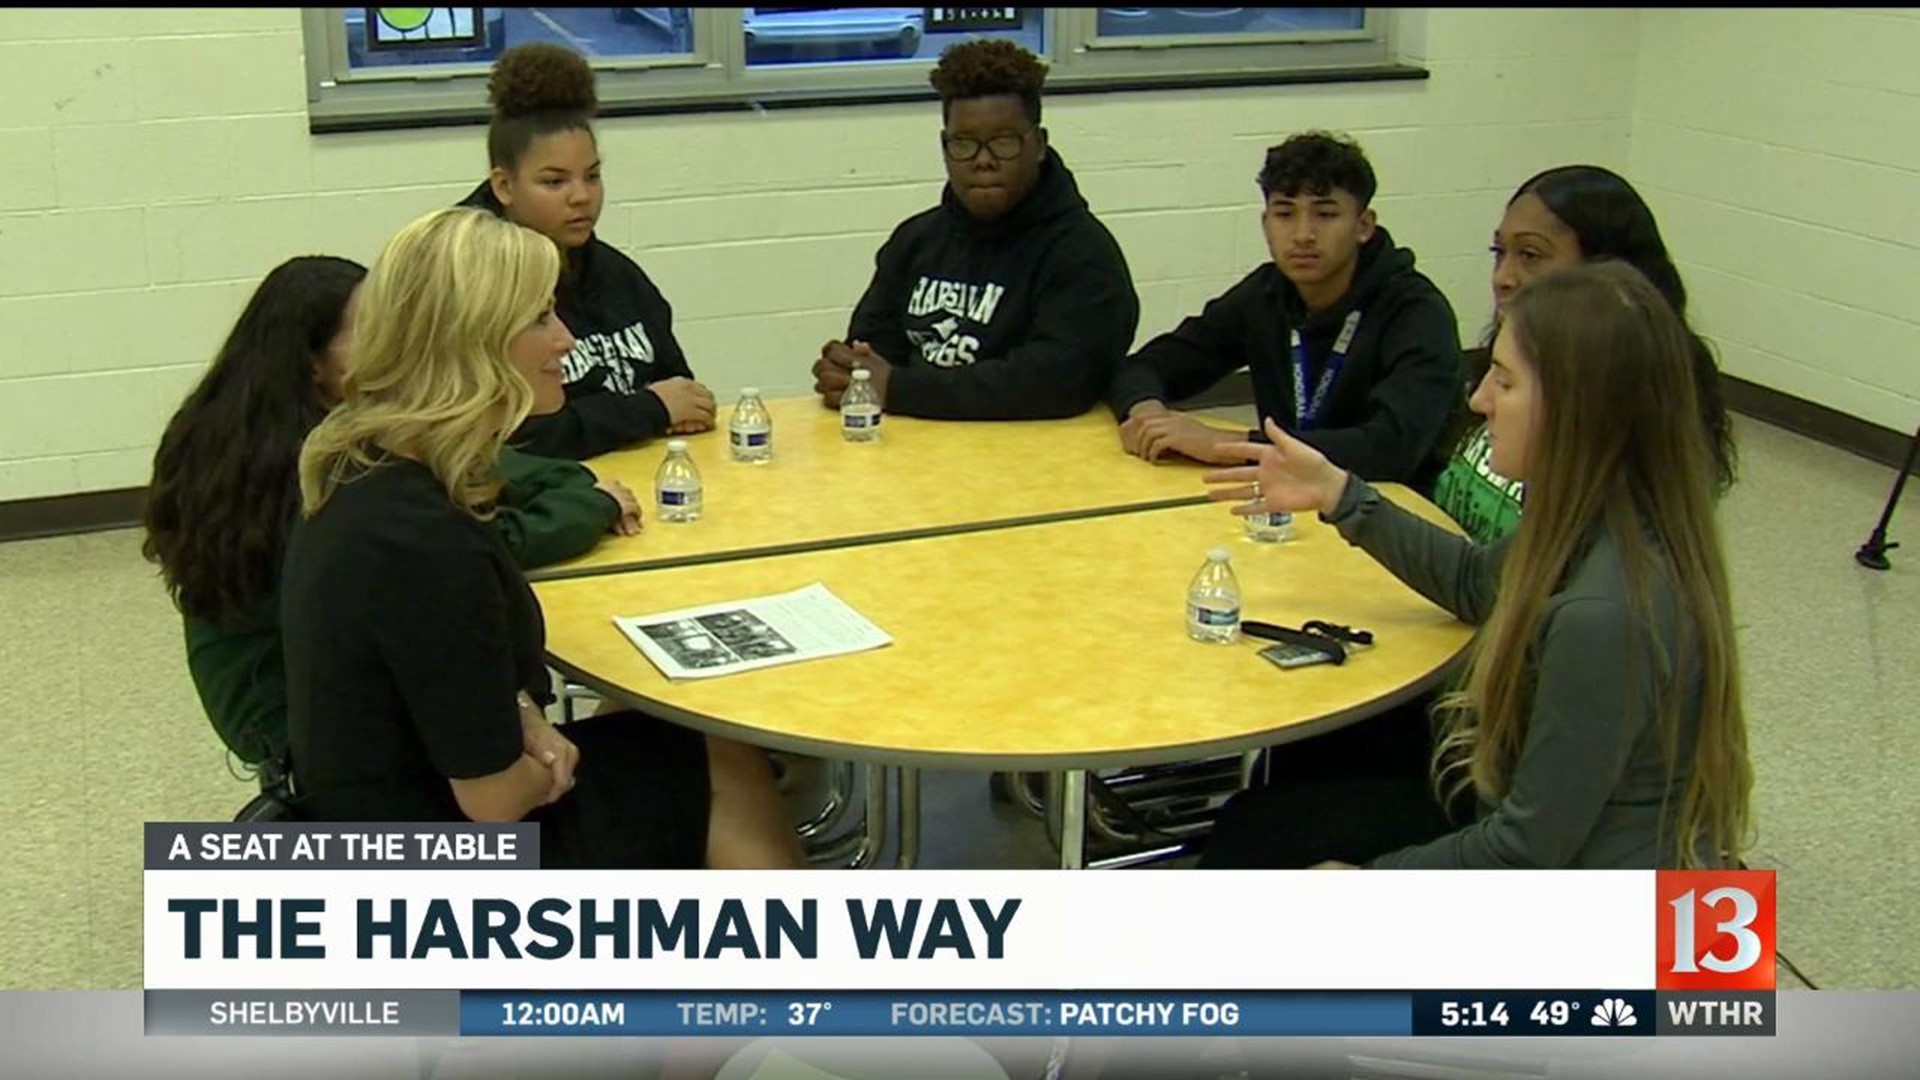 A Seat at the Table: The Harshman Way